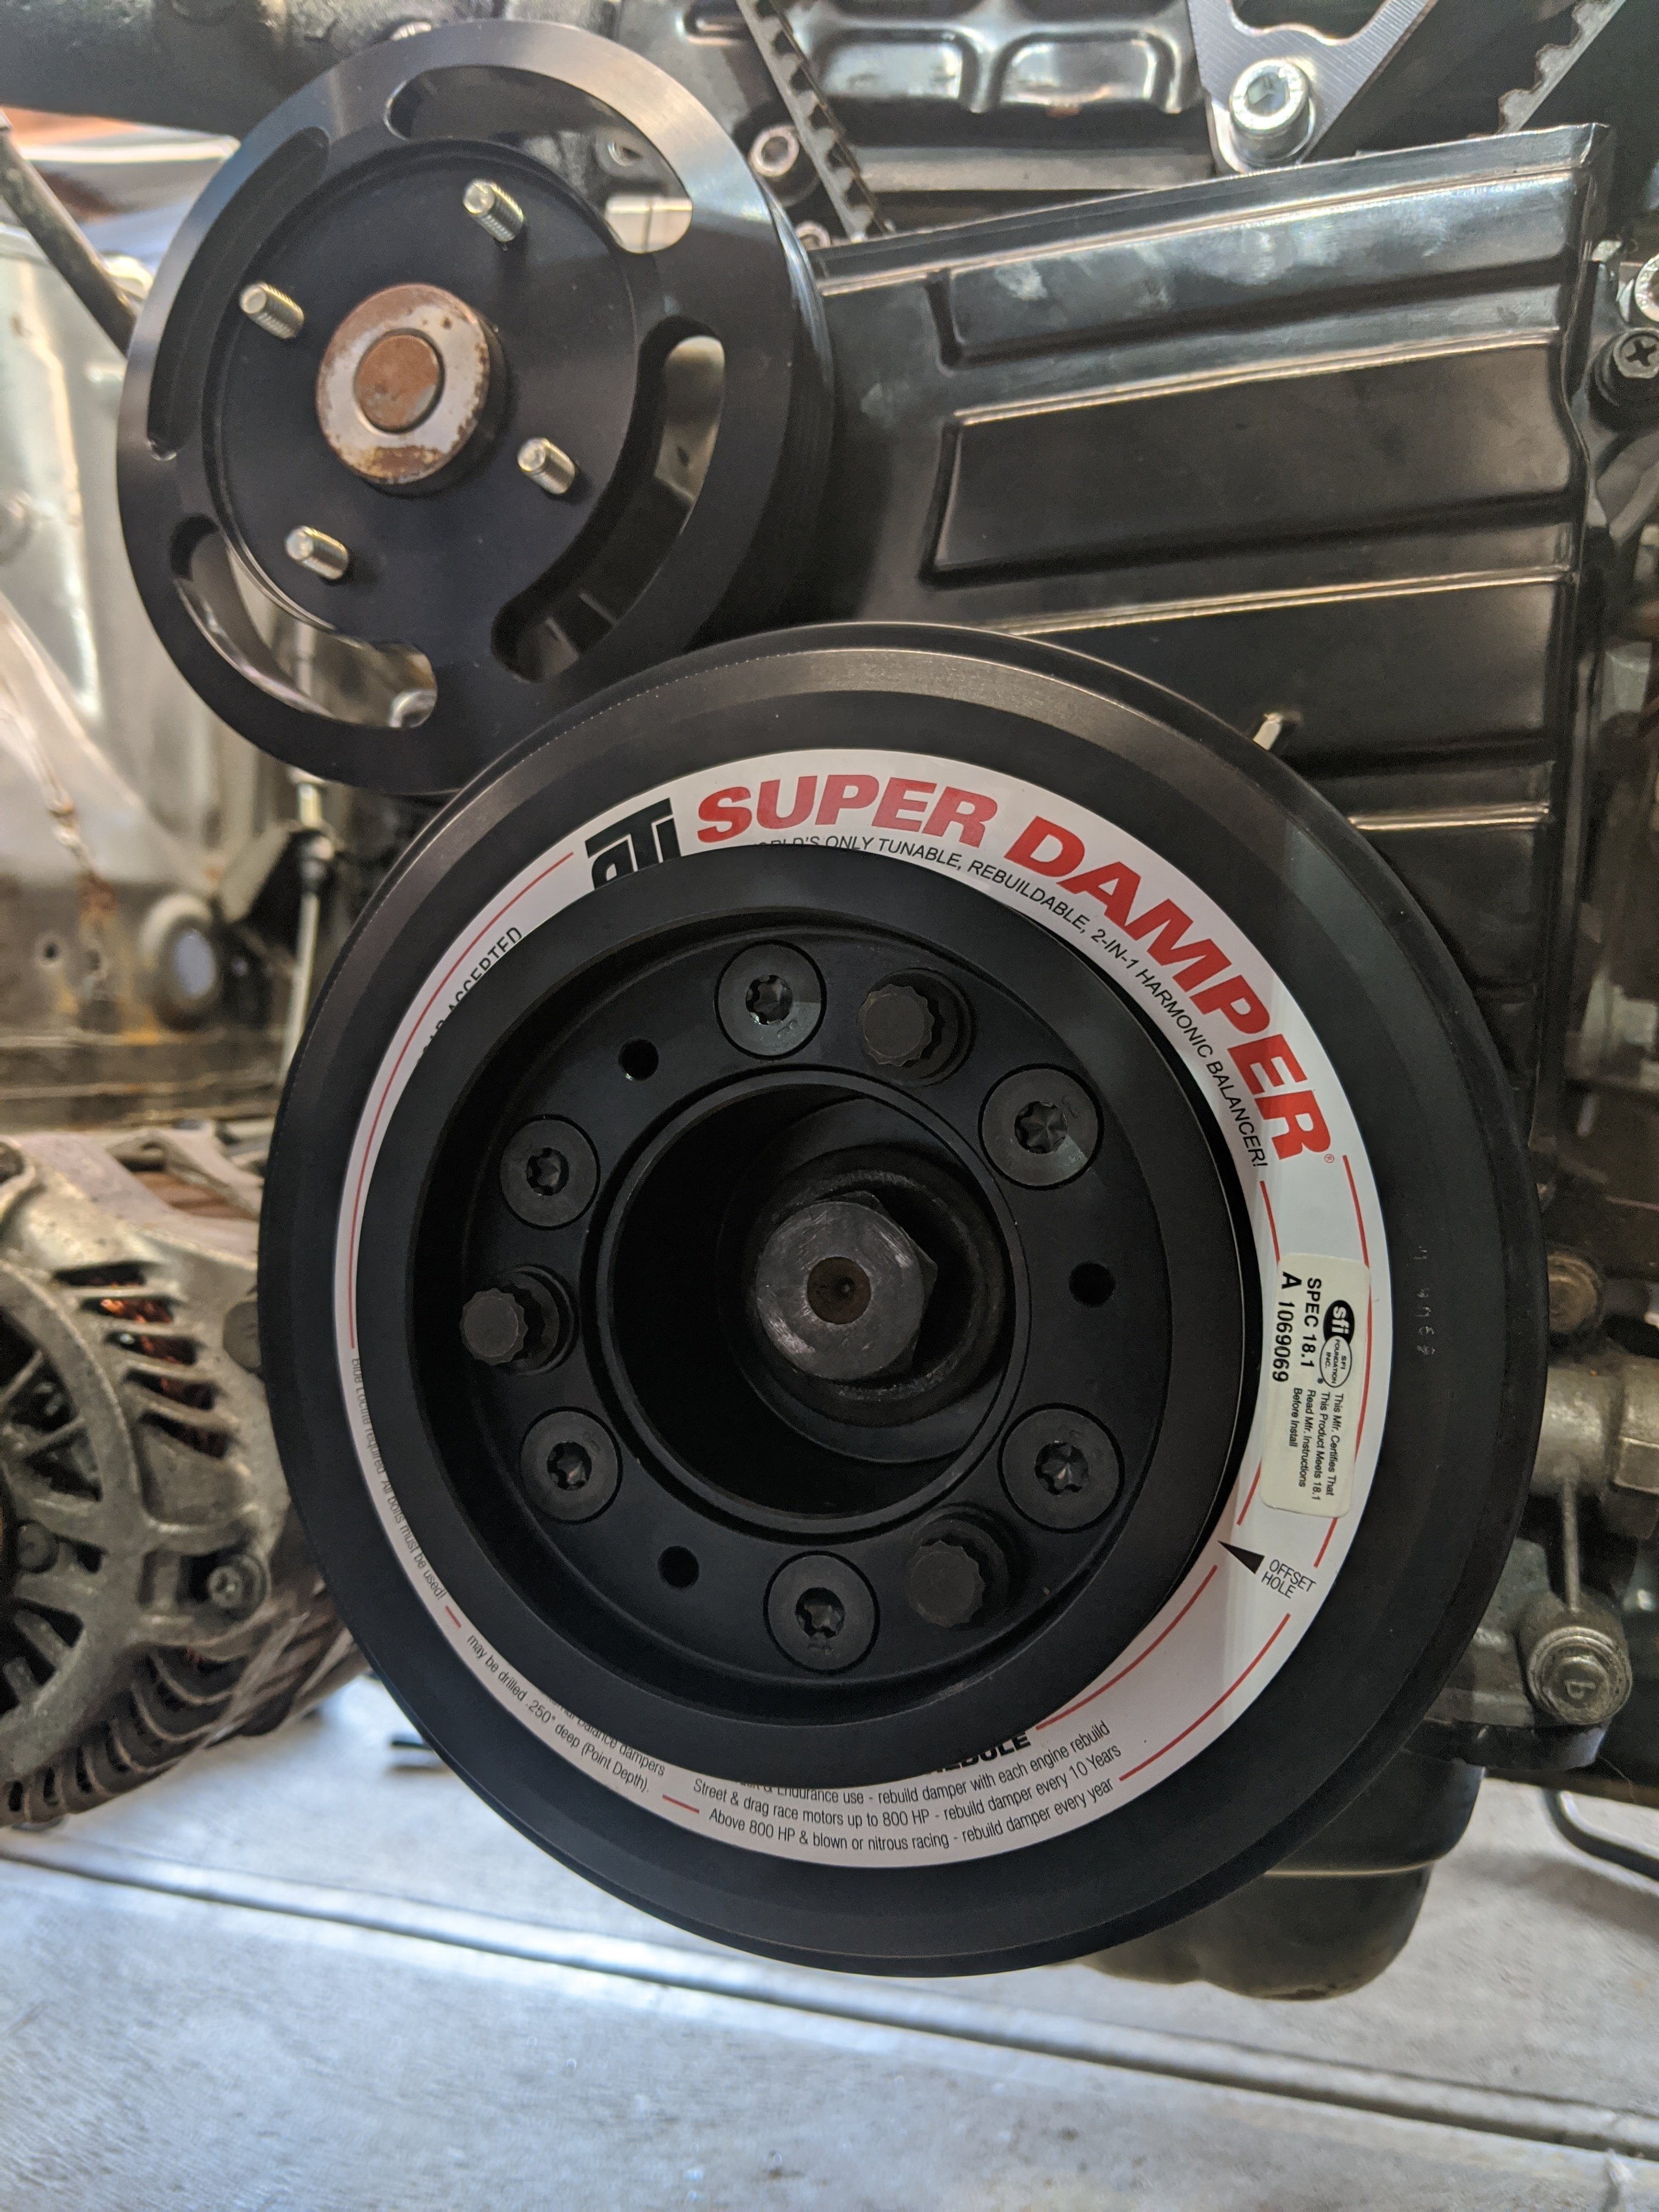 ATI Super Damper for RB engines - Forced Induction Performance